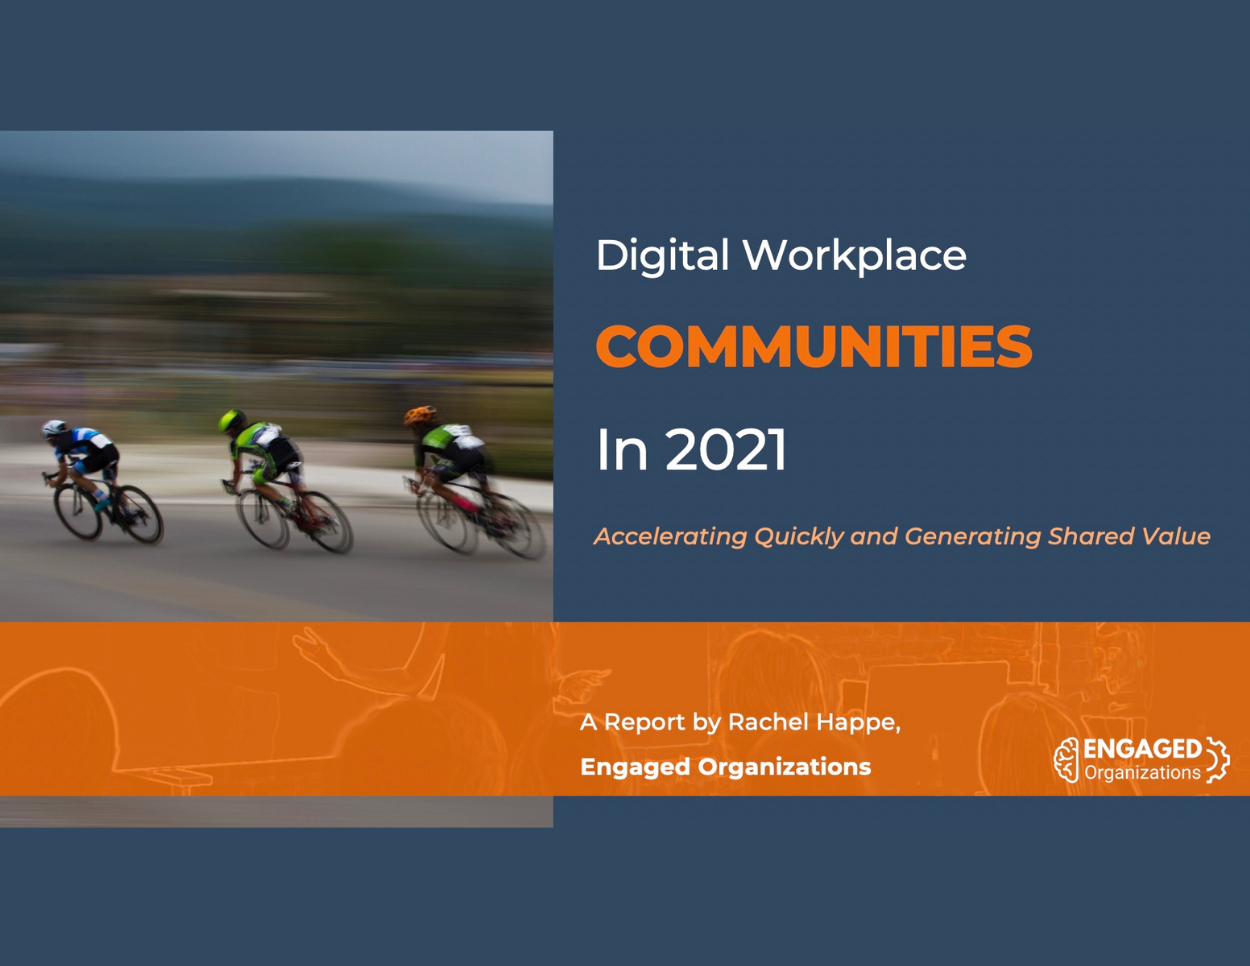 Communities in the Digital Workplace Research